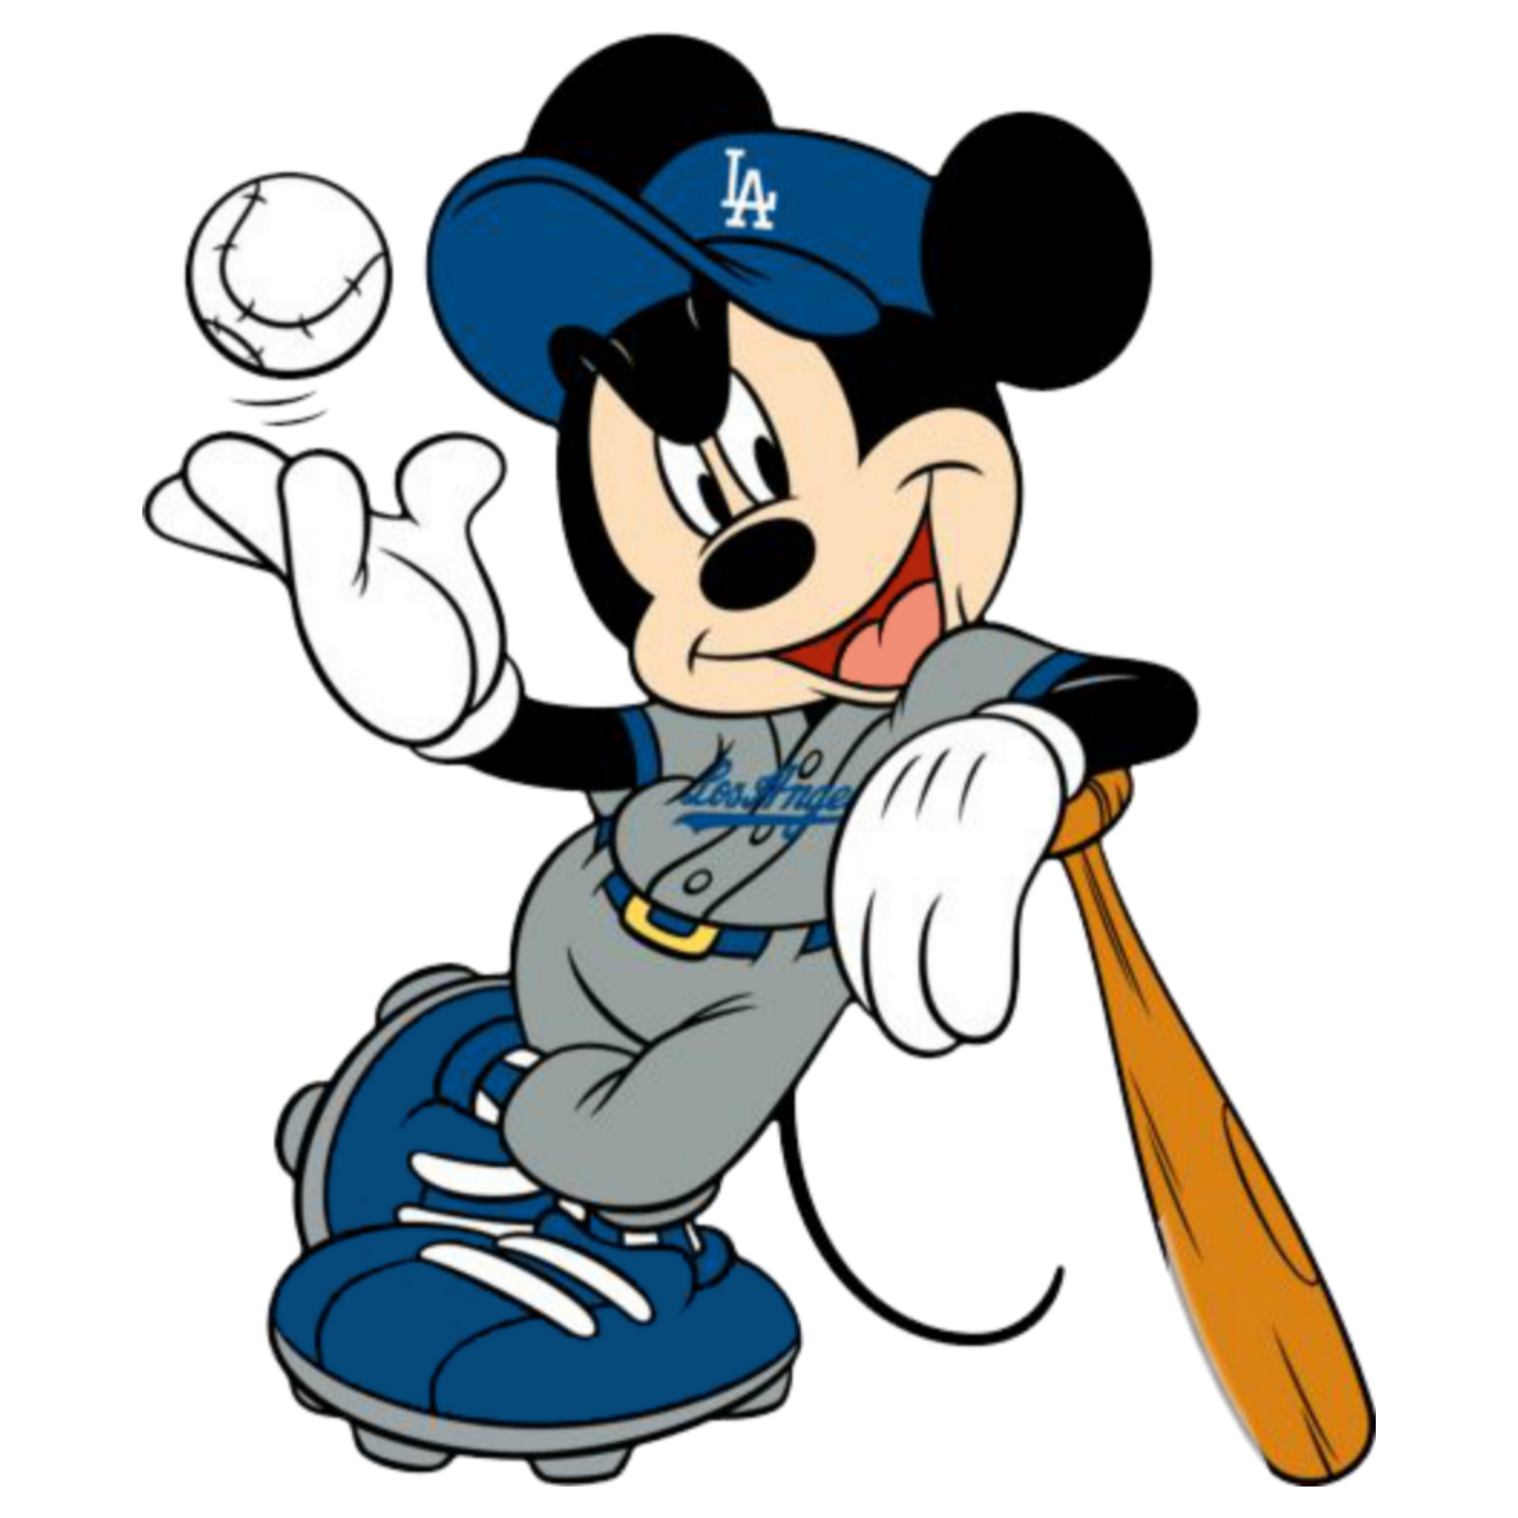 This visual is about mickeymouse dodgers disney gododgers bleedblue freetoe...